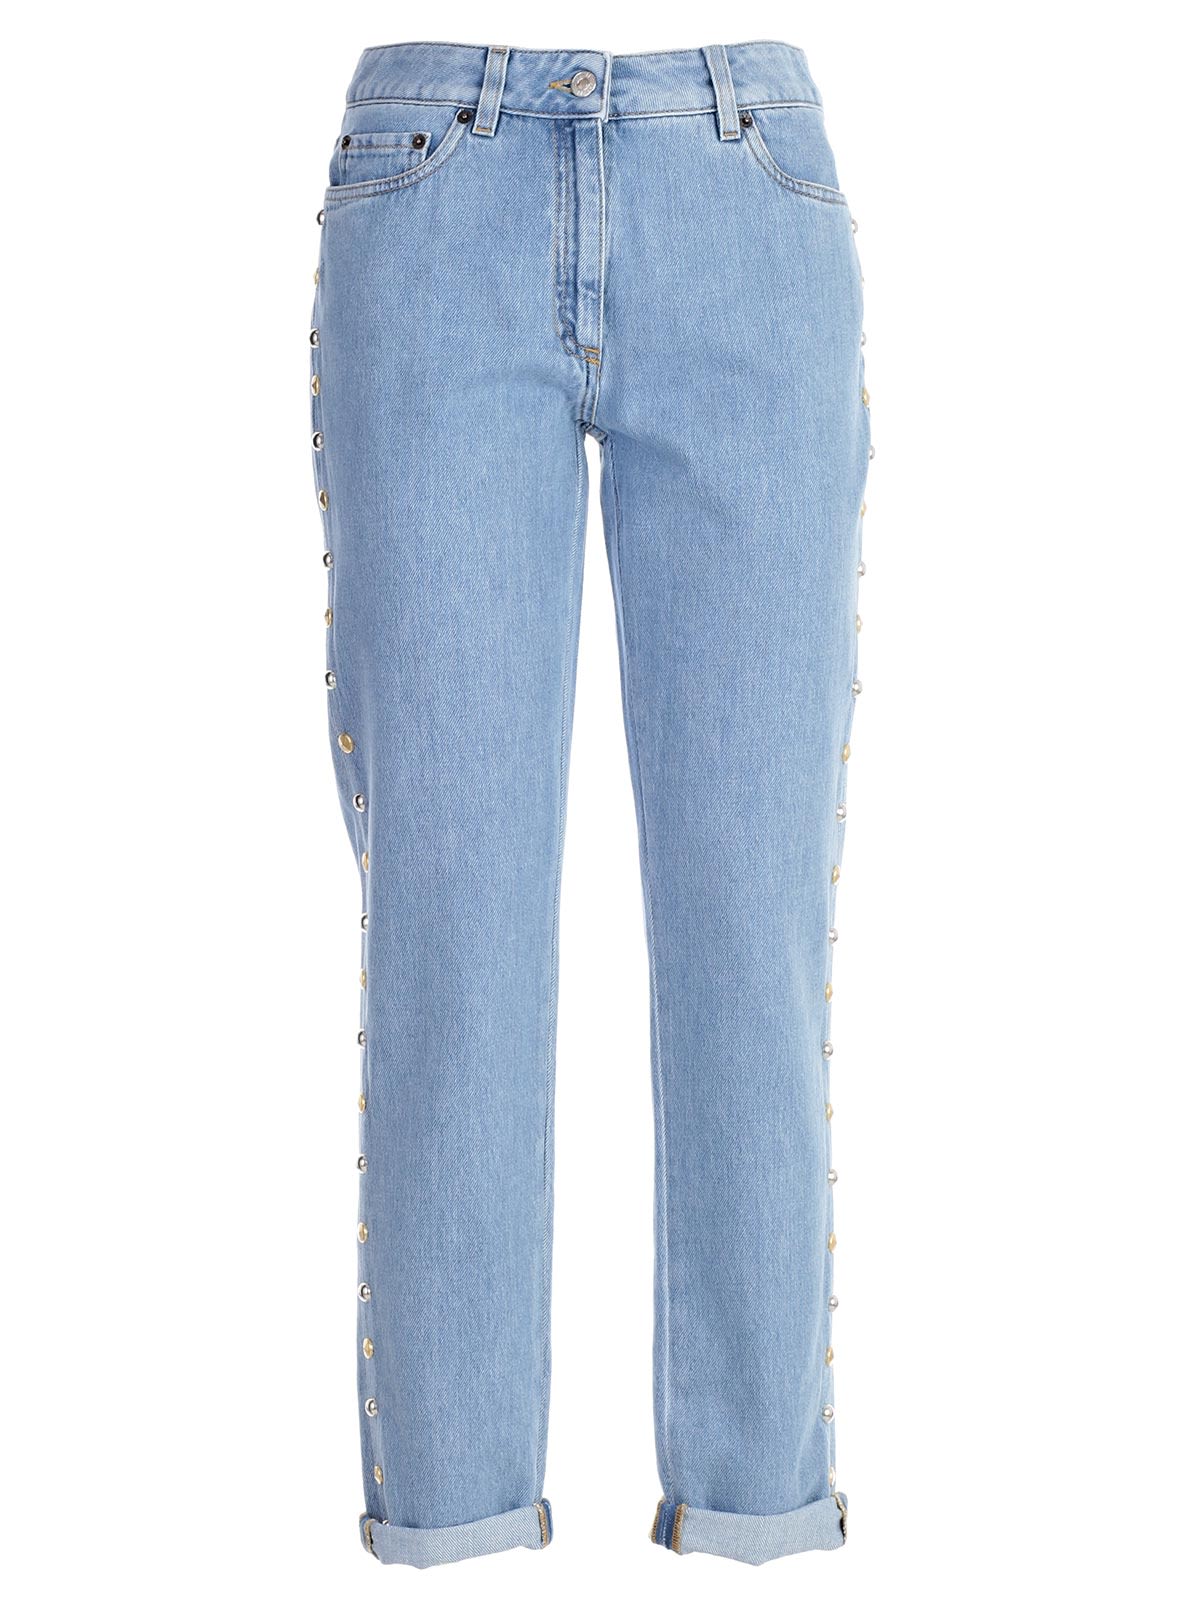 Moschino - Moschino Jeans - Blue, Women's Jeans | Italist